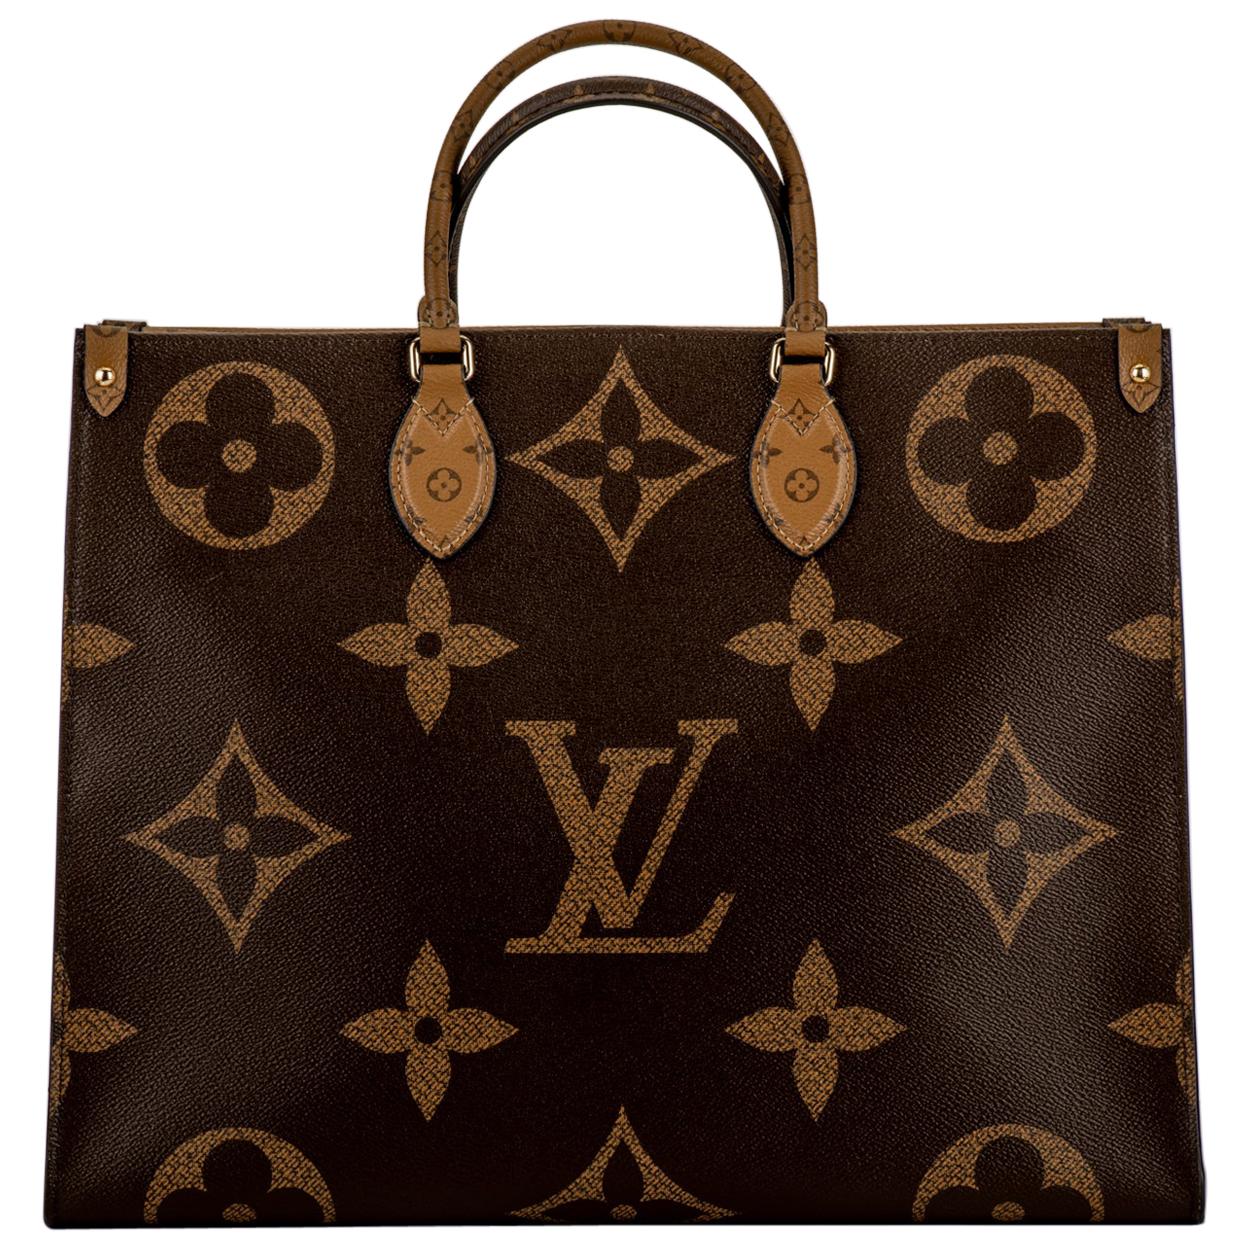 New with box Louis Vuitton Monogram On The Go Tote Bag